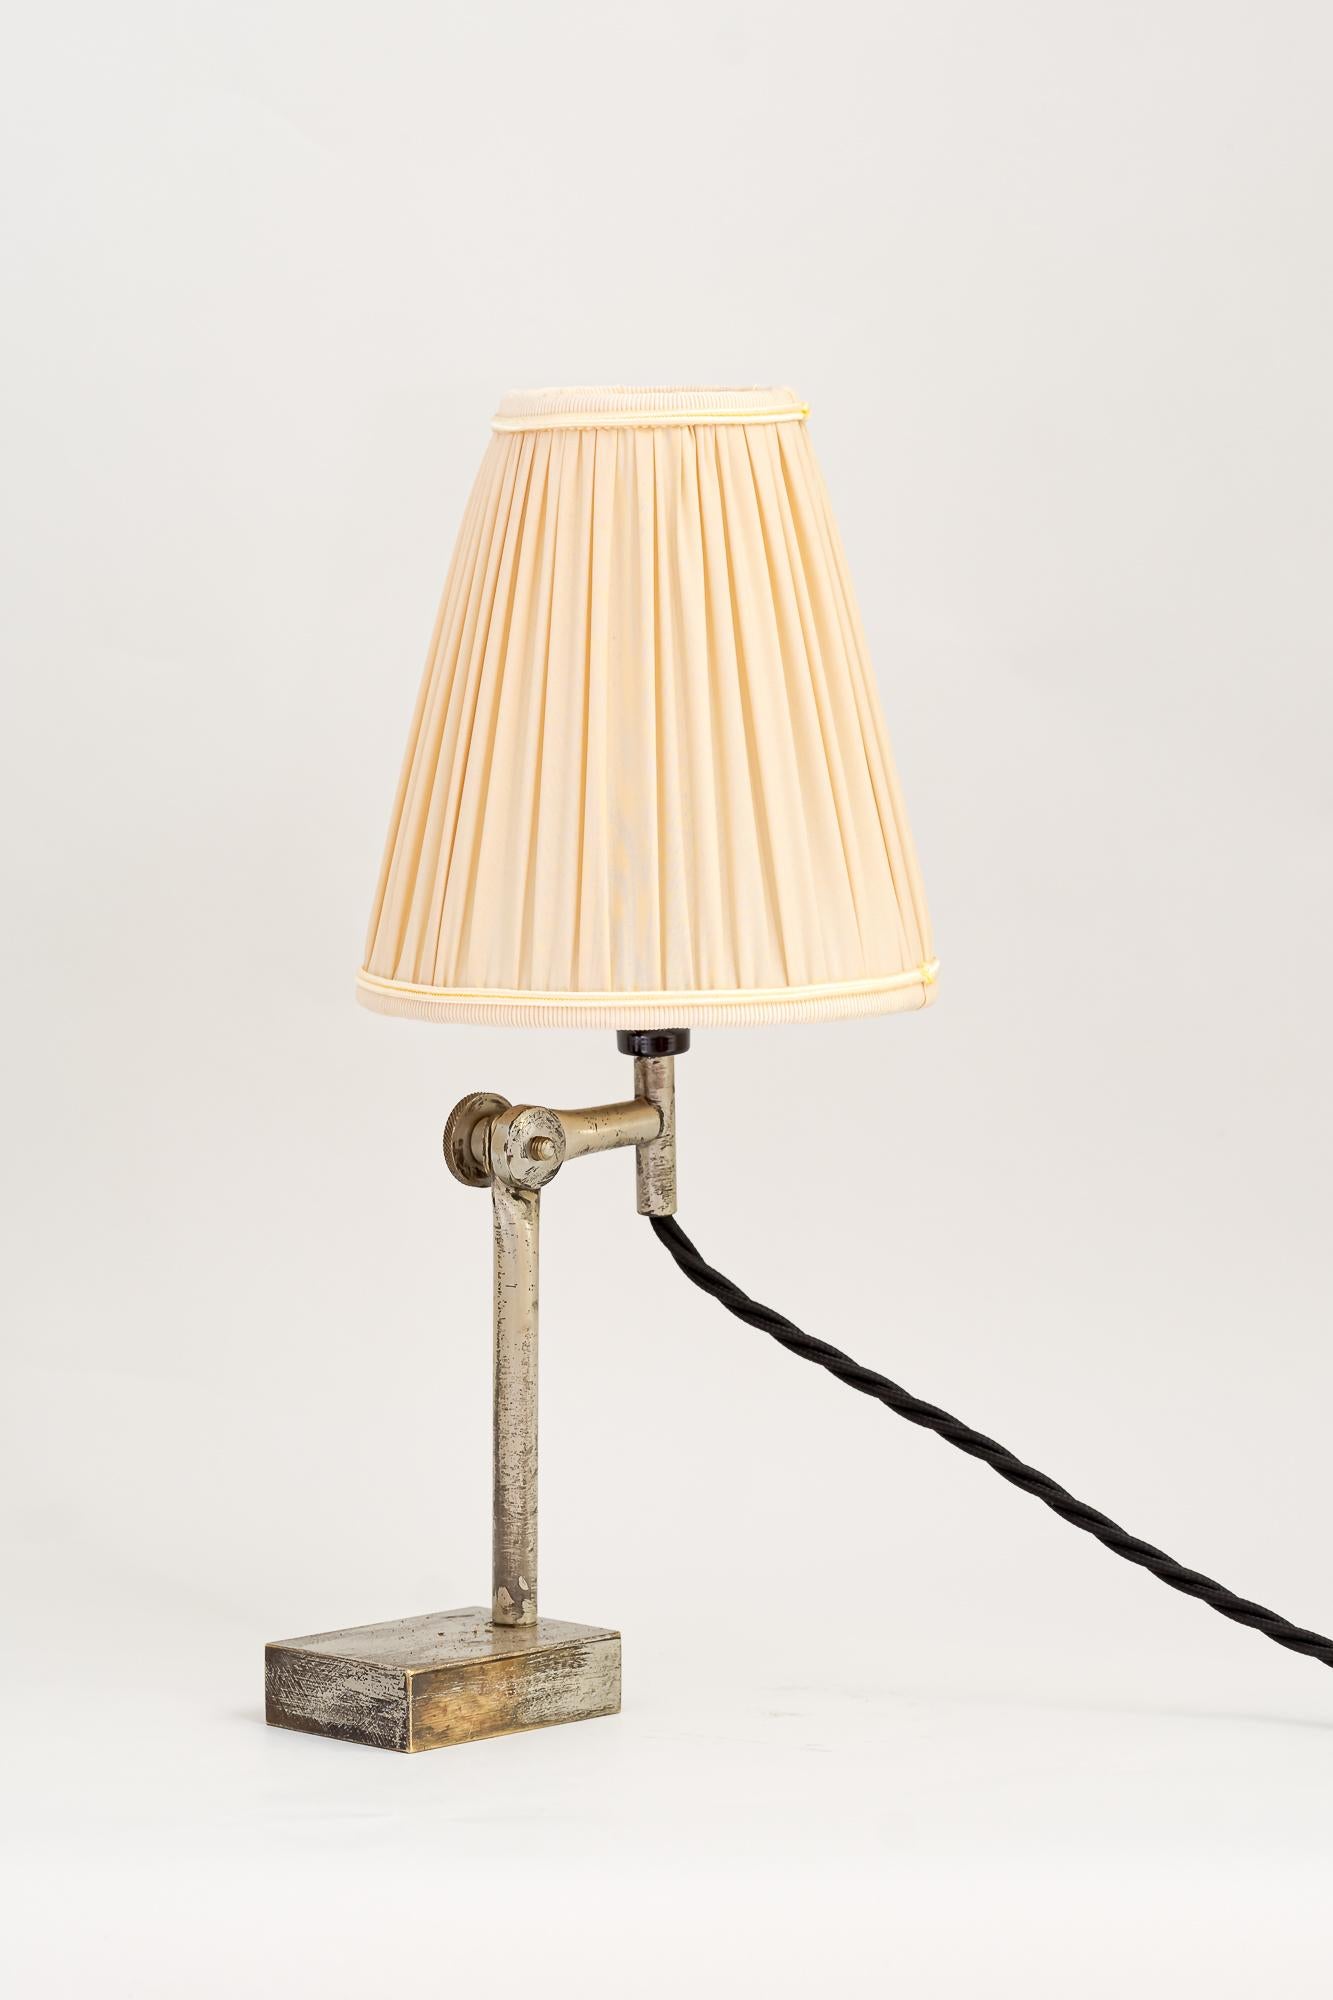 2 Adjustable Vintage table lamps, Vienna, around 1950s.
Brass silvered
Original condition
Only the shades are replaced ( new )
One is a little bit higher: 
H: 32cm
W: 14cm
D: 19cm.